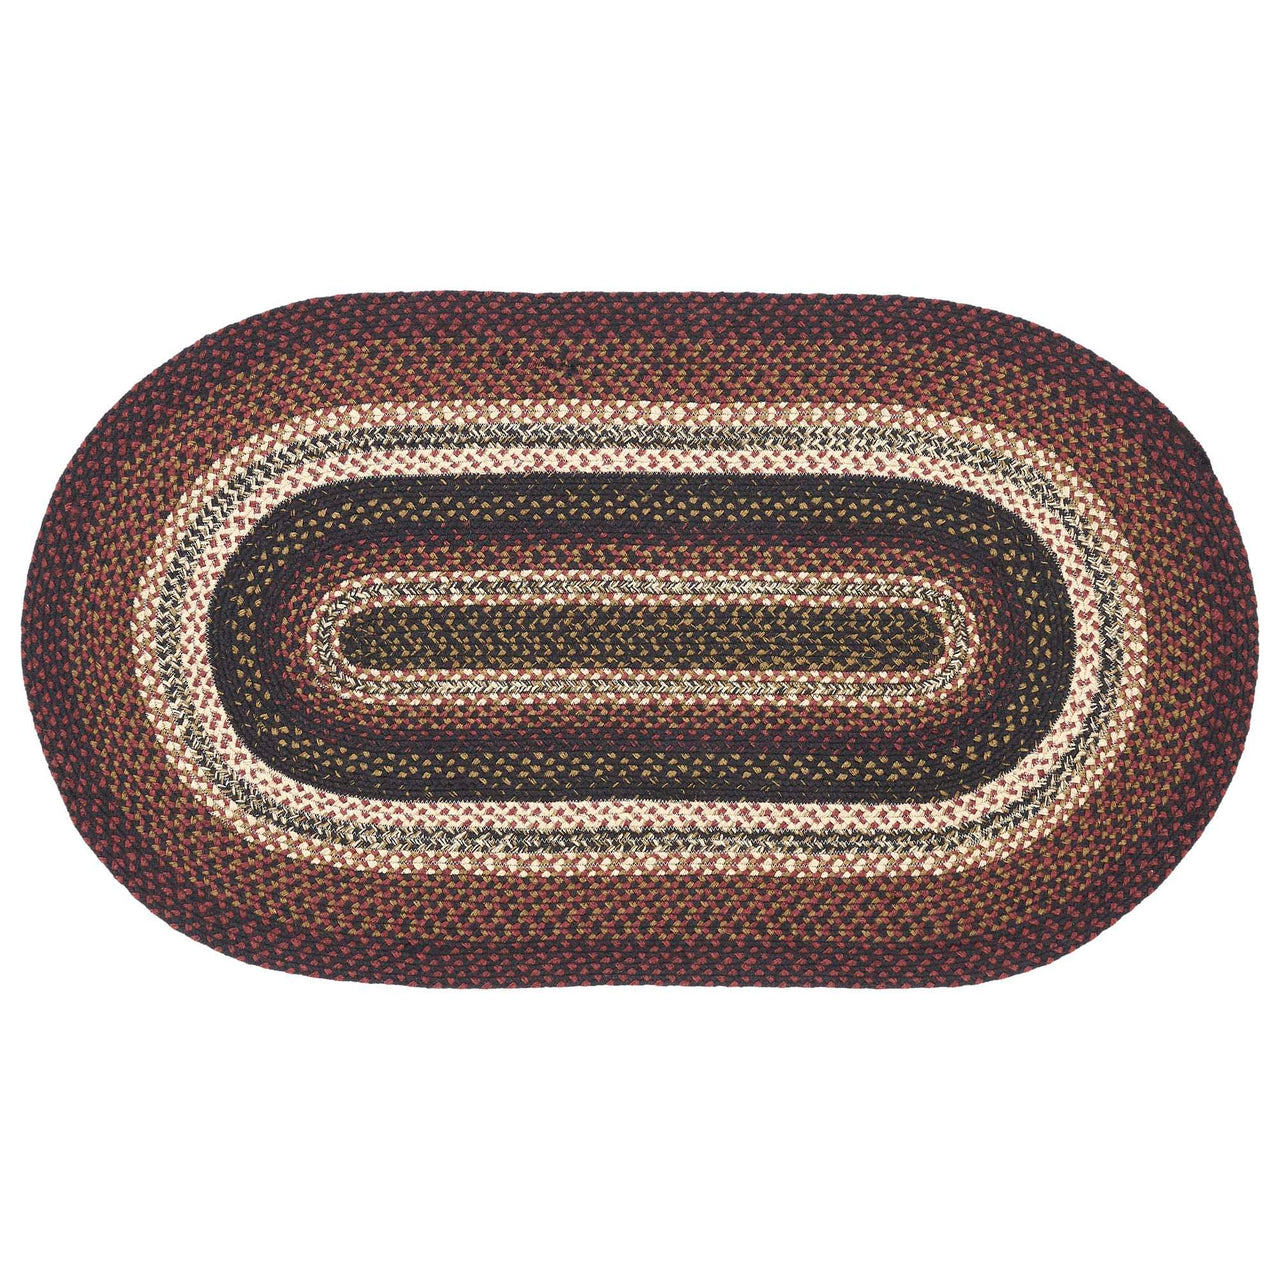 Beckham Jute Braided Rug Oval with Rug Pad 27"x48" VHC Brands